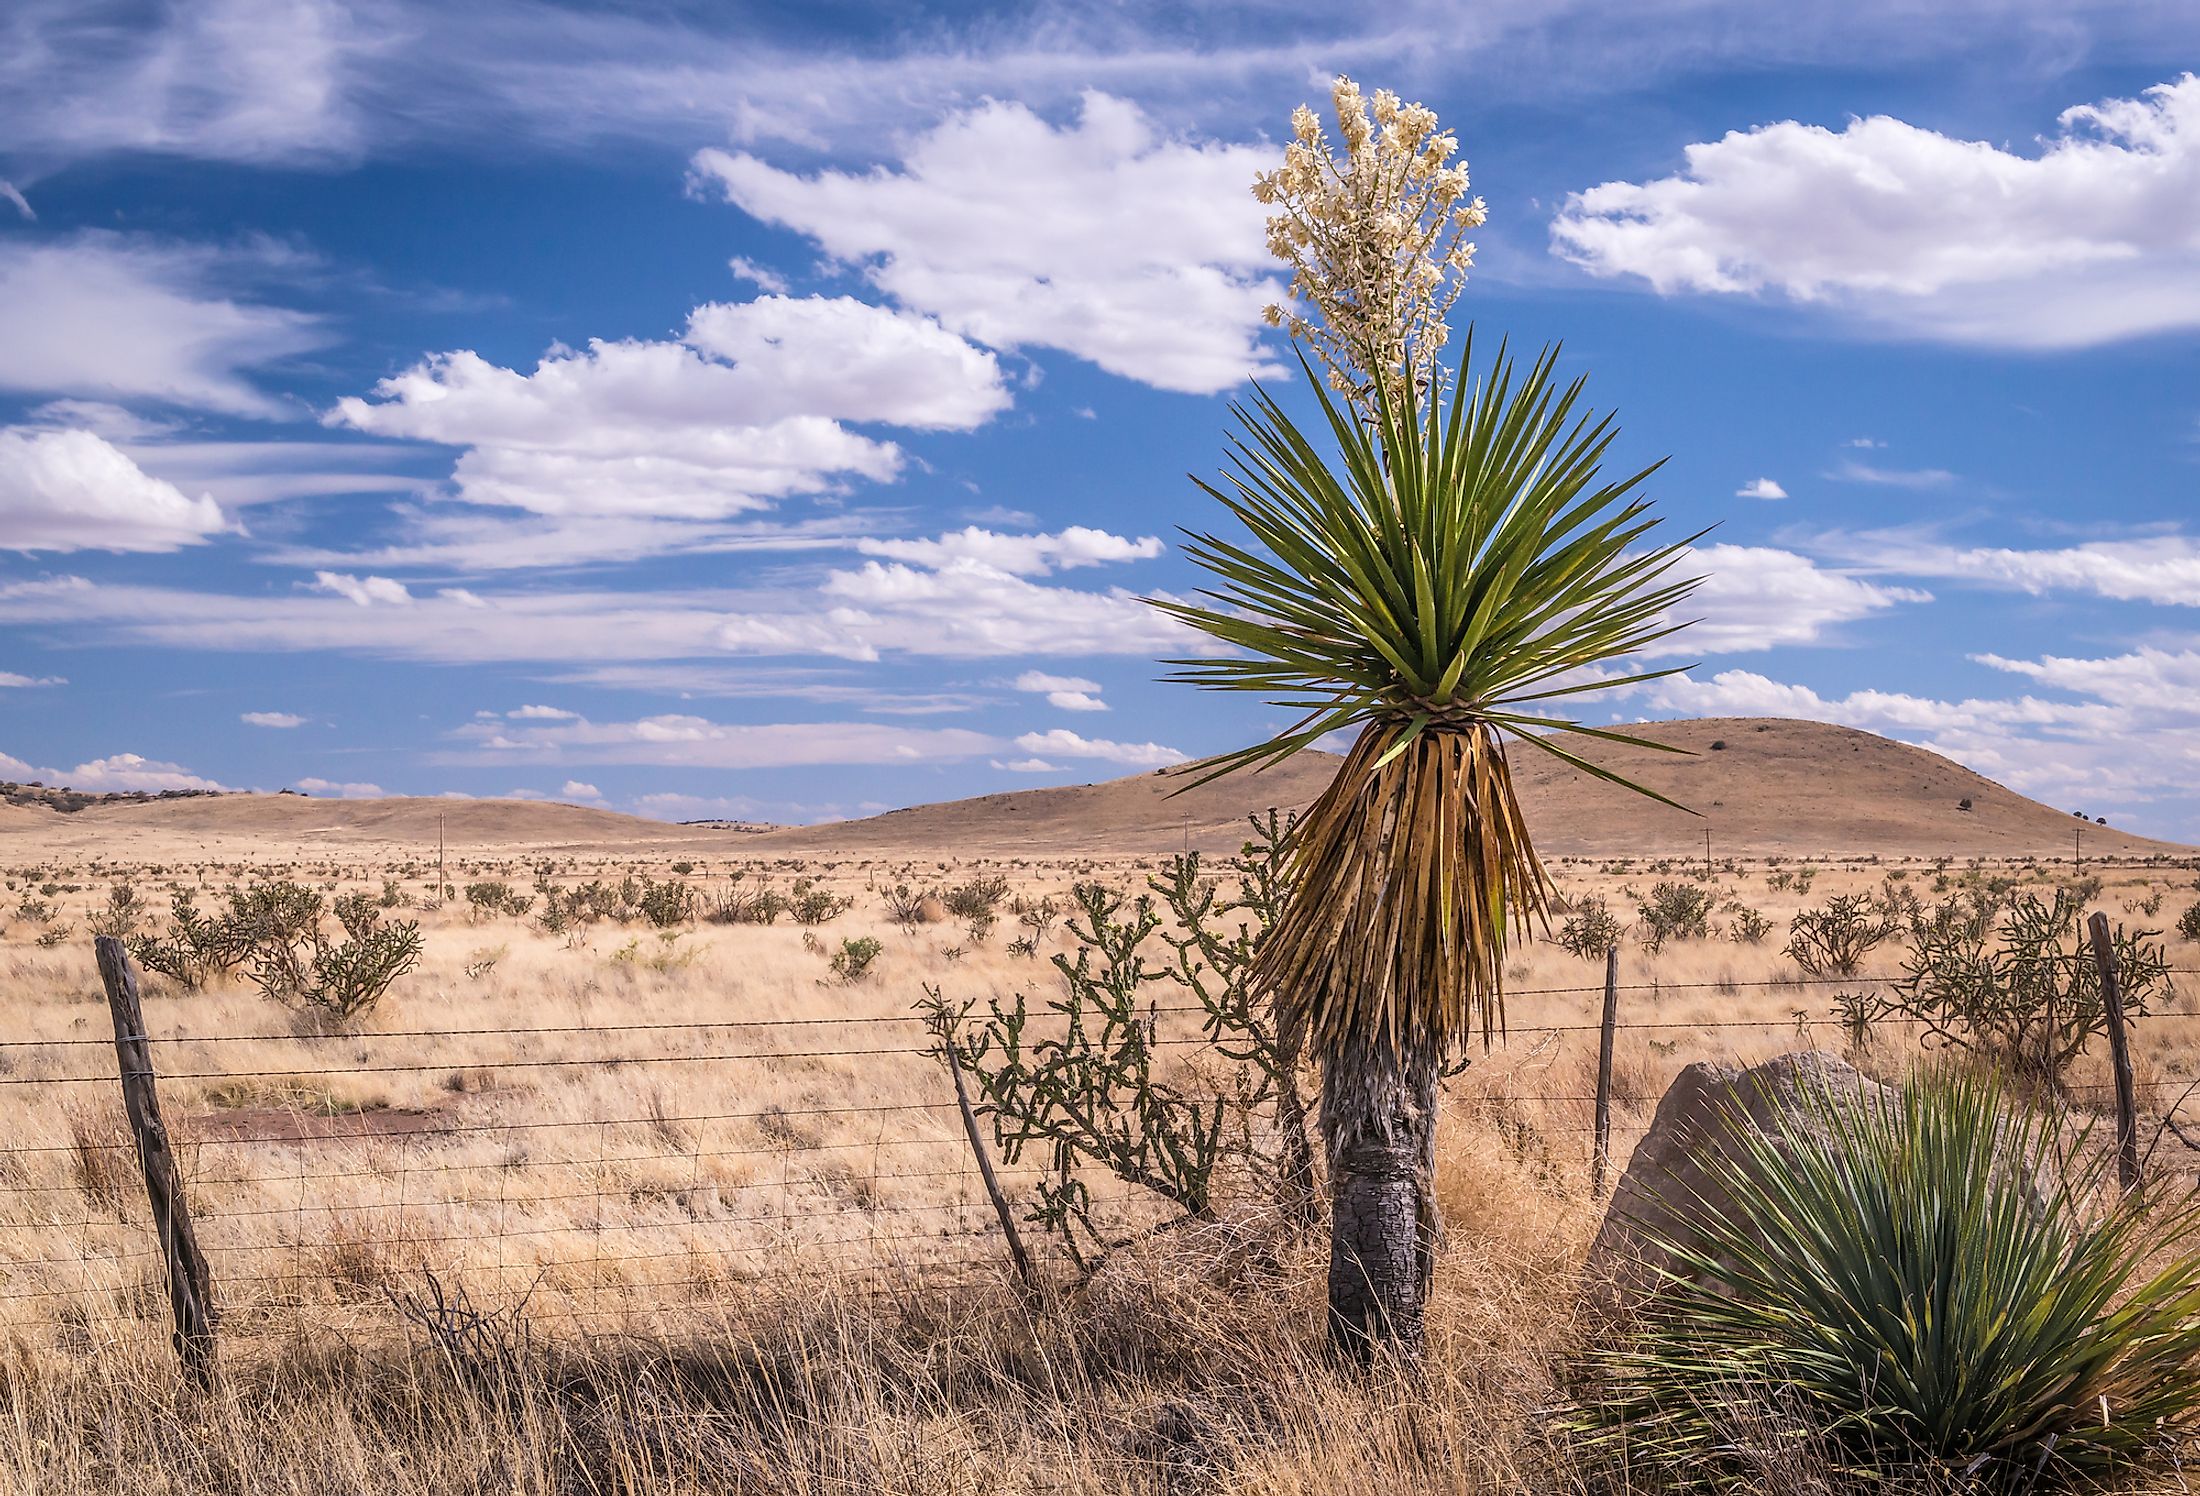 Yuca blooms in the Chihuahuan desert of Texas.